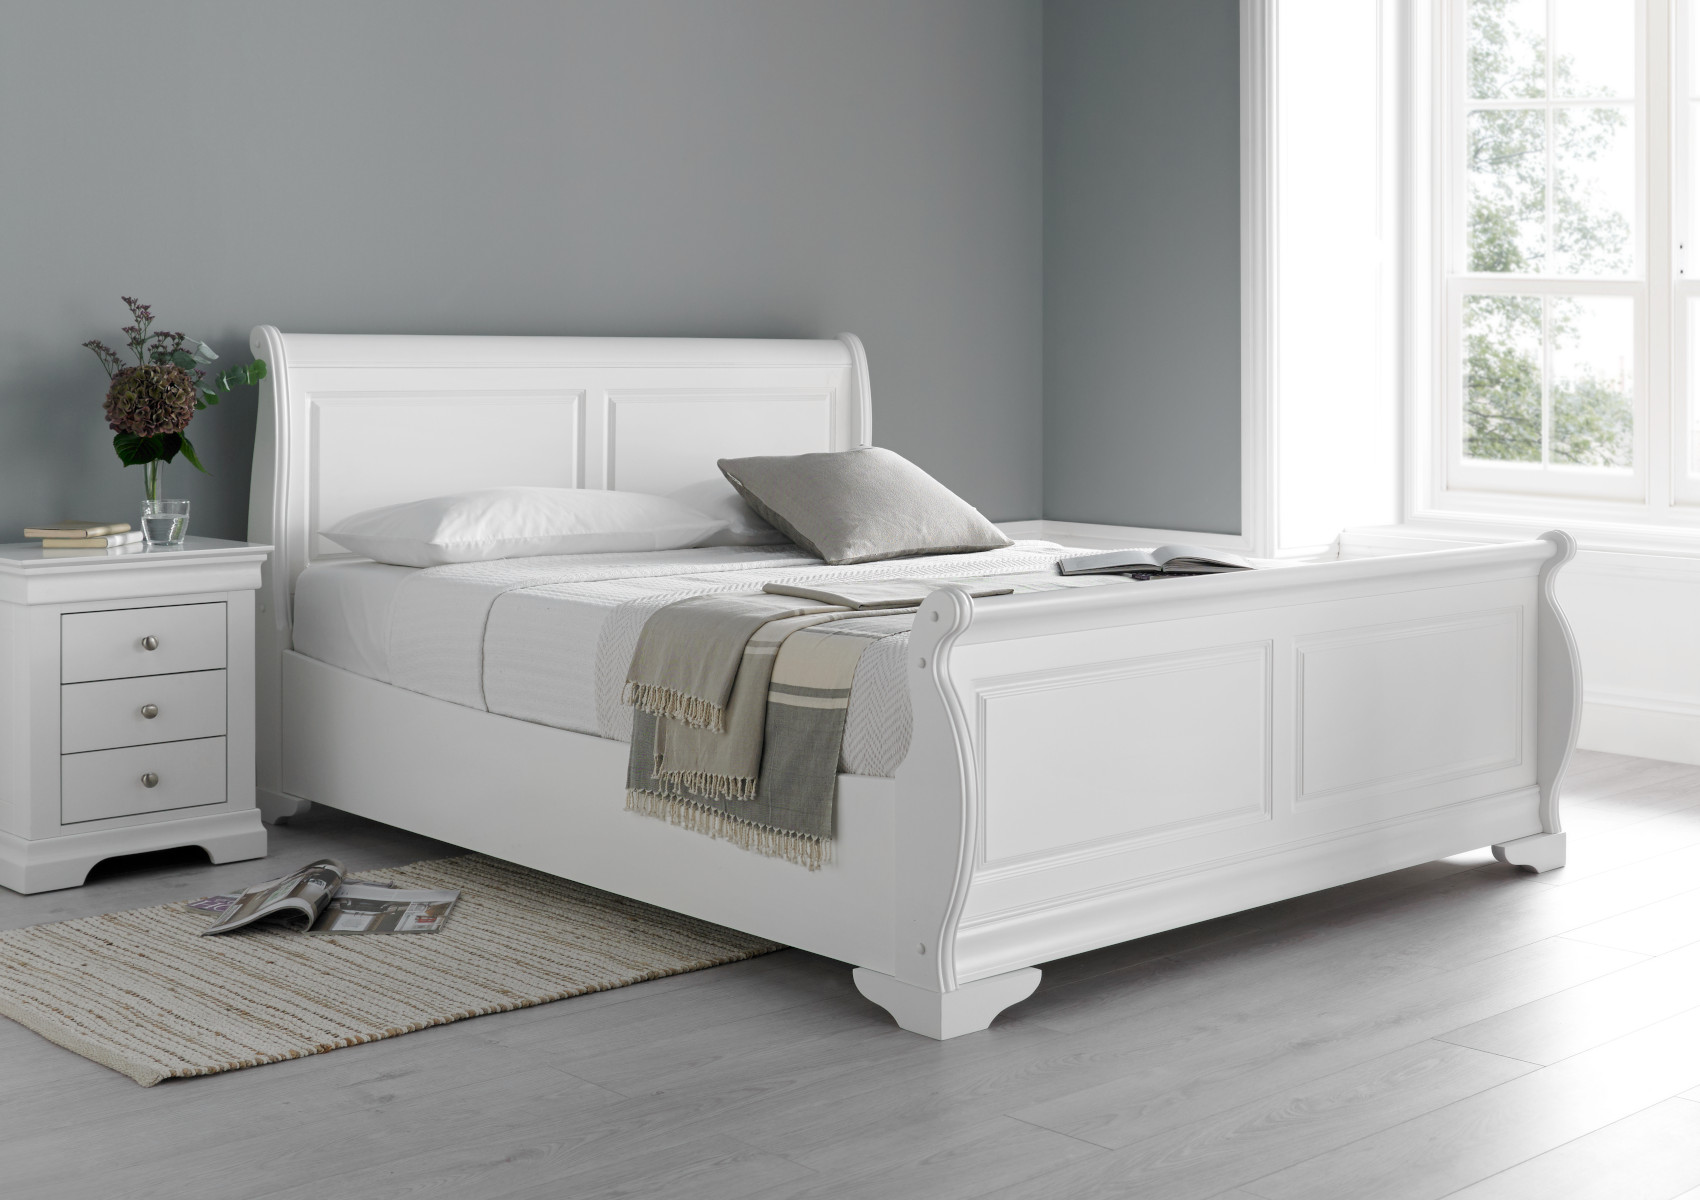 View Toulon Wooden Sleigh Bed White Bed Frame Only Time4Sleep information